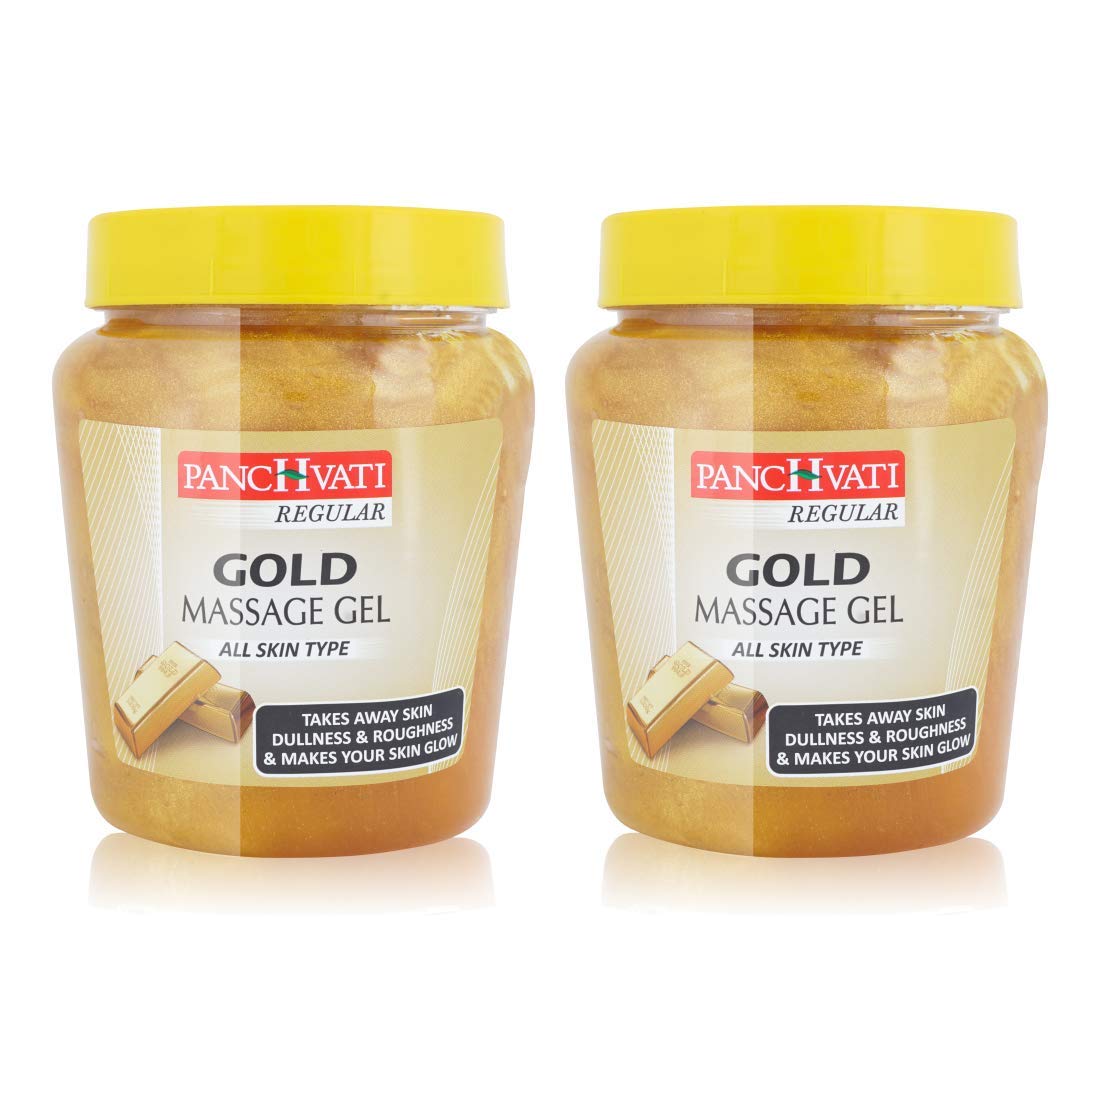 Panchvati Herbals Gold Massage Gel for Bright & Glowing Skin (Each 500 ml) Pack of - 2